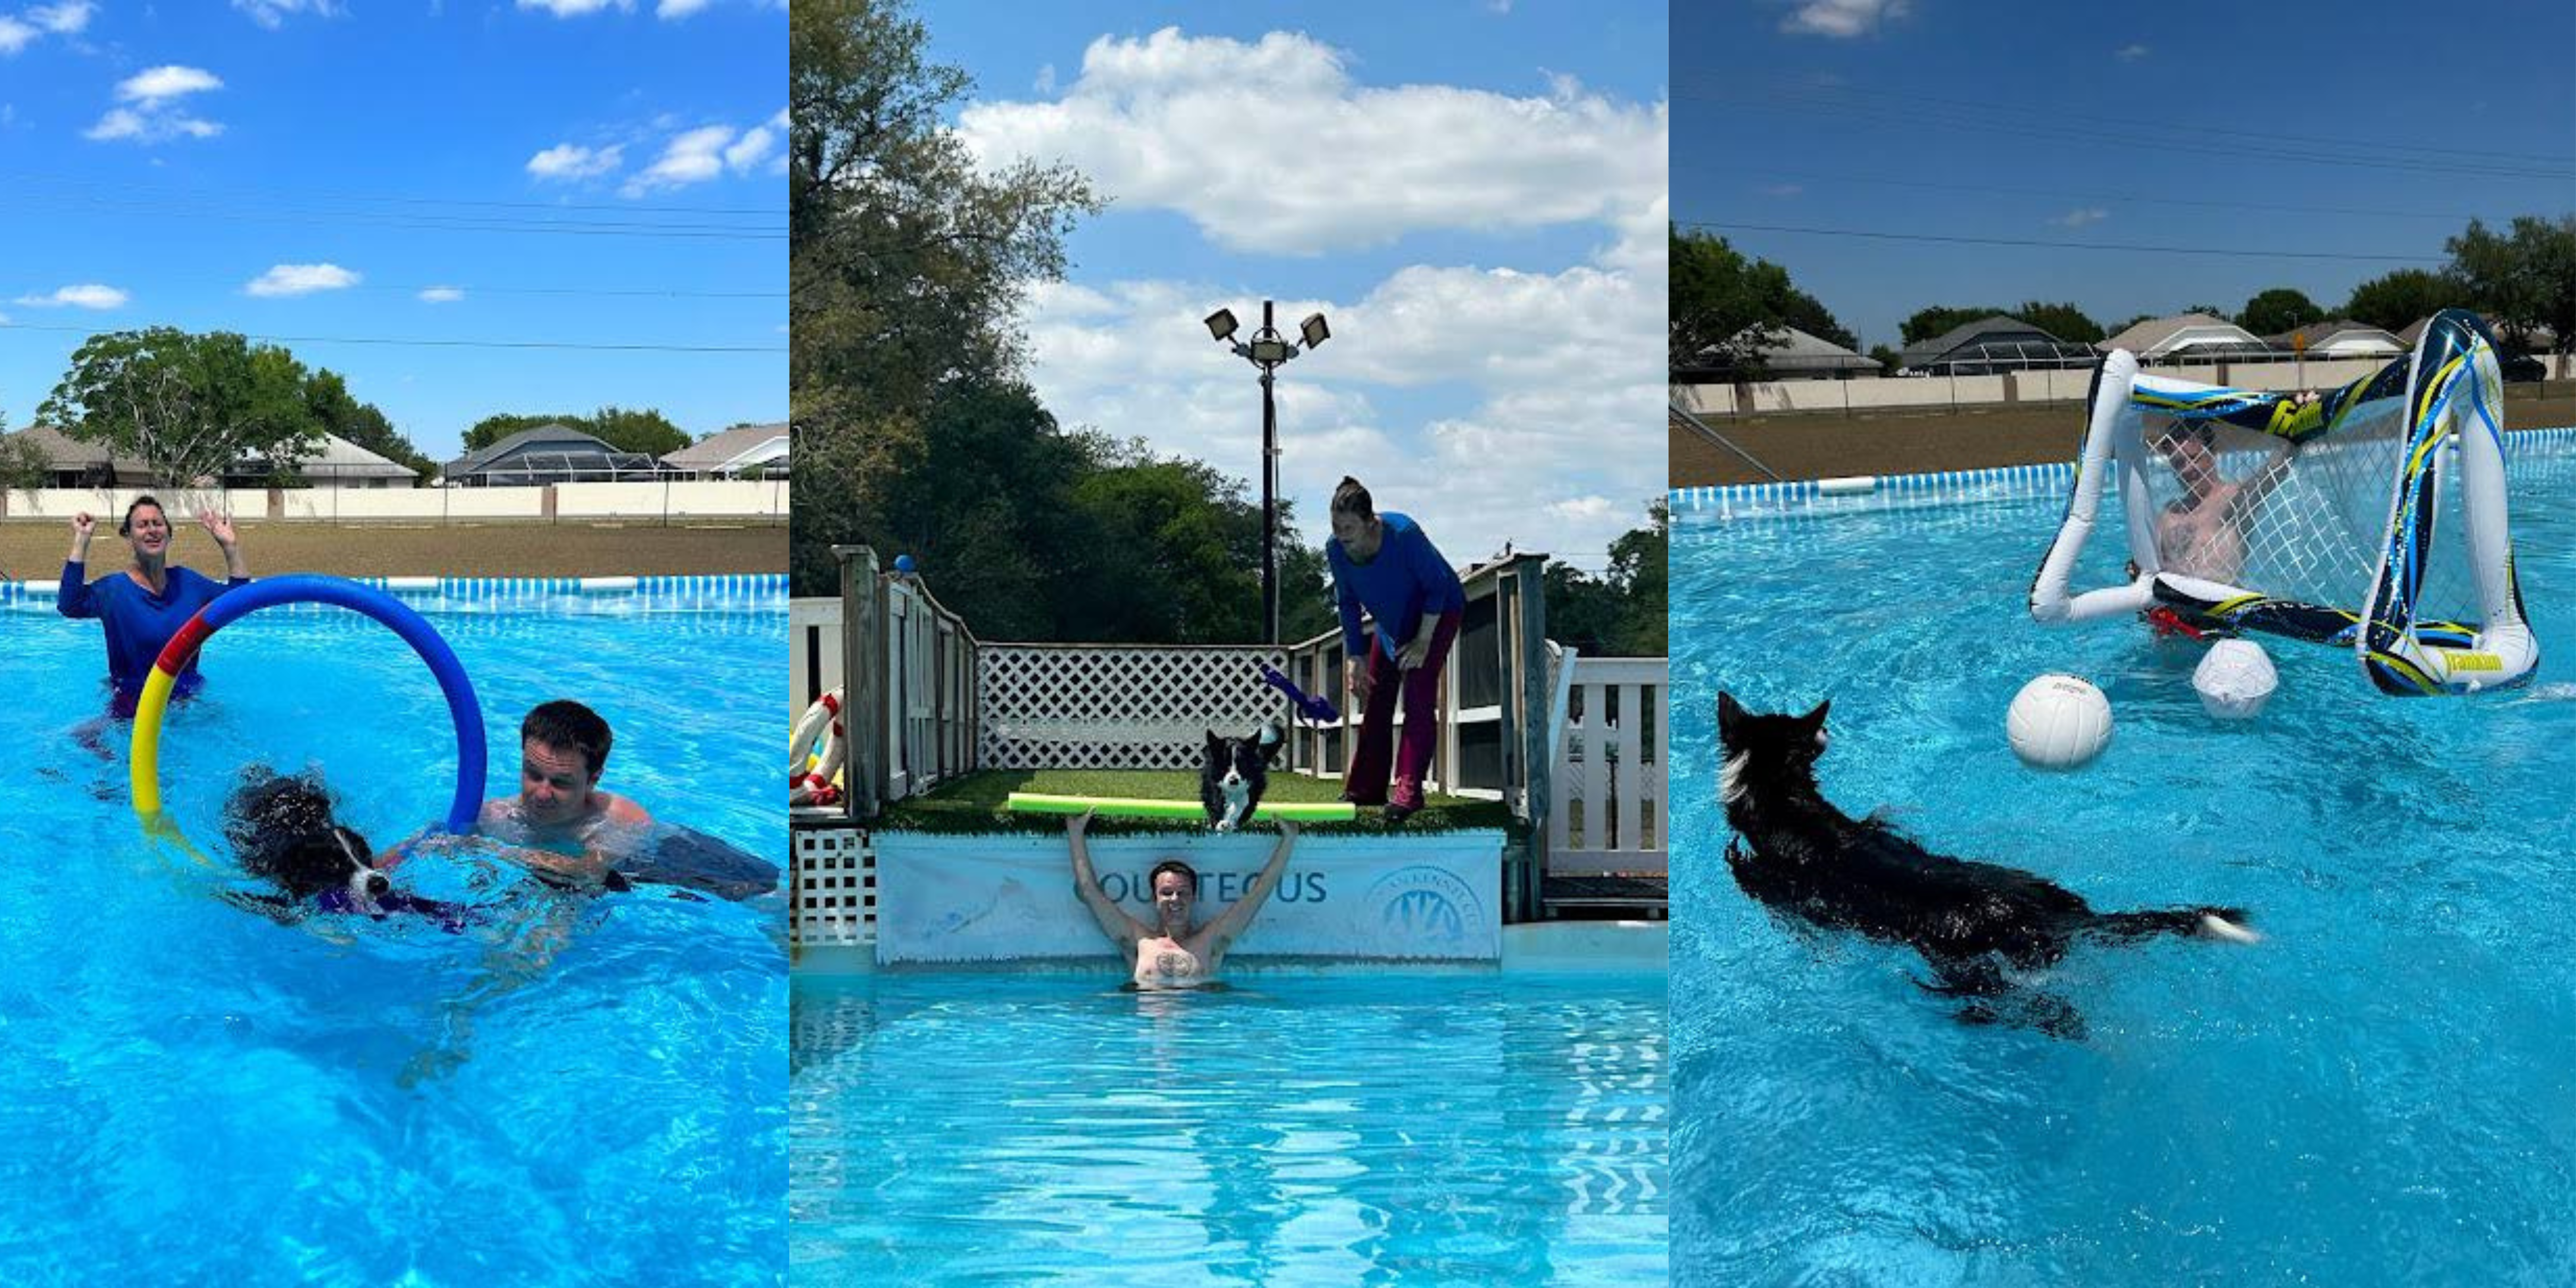 Dog going through a hoop in the pool, jumping over a person into pool, and playing soccer in pool